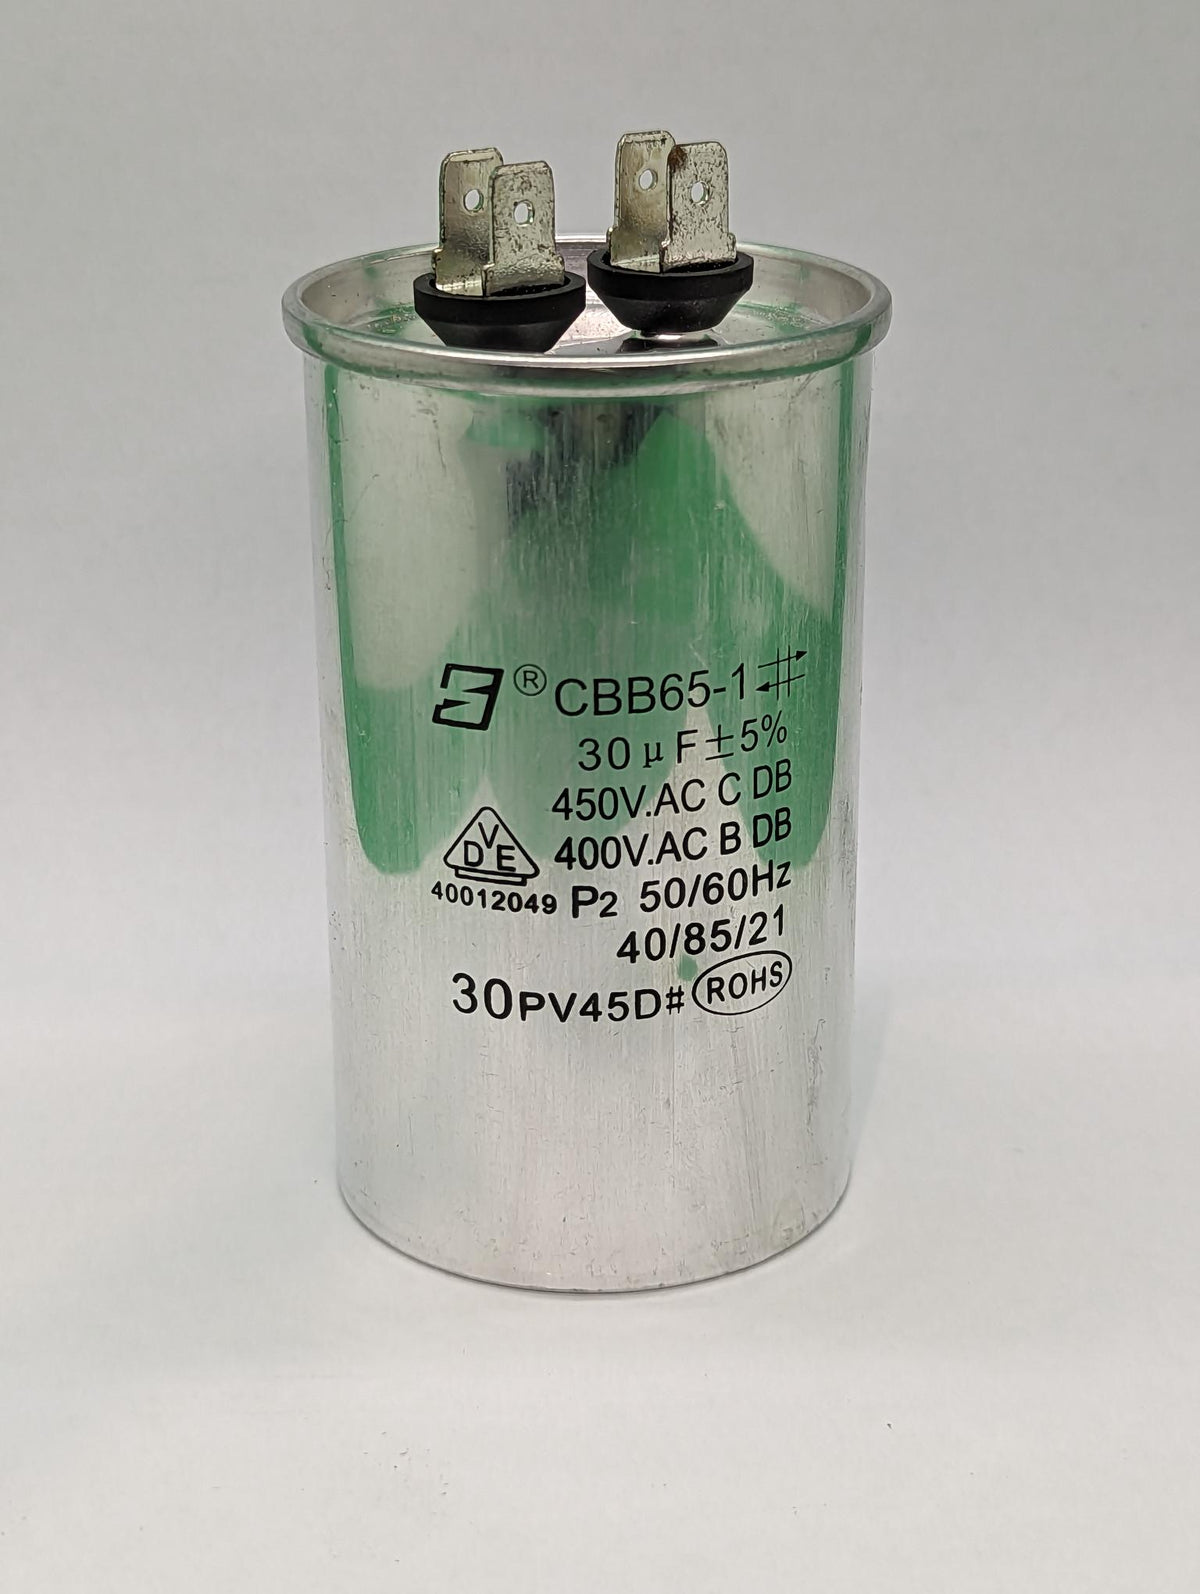 Davey 30uf Capacitor to suit QB2001 / QB2002 Spa Pump models with (1500W Motor) - Genuine